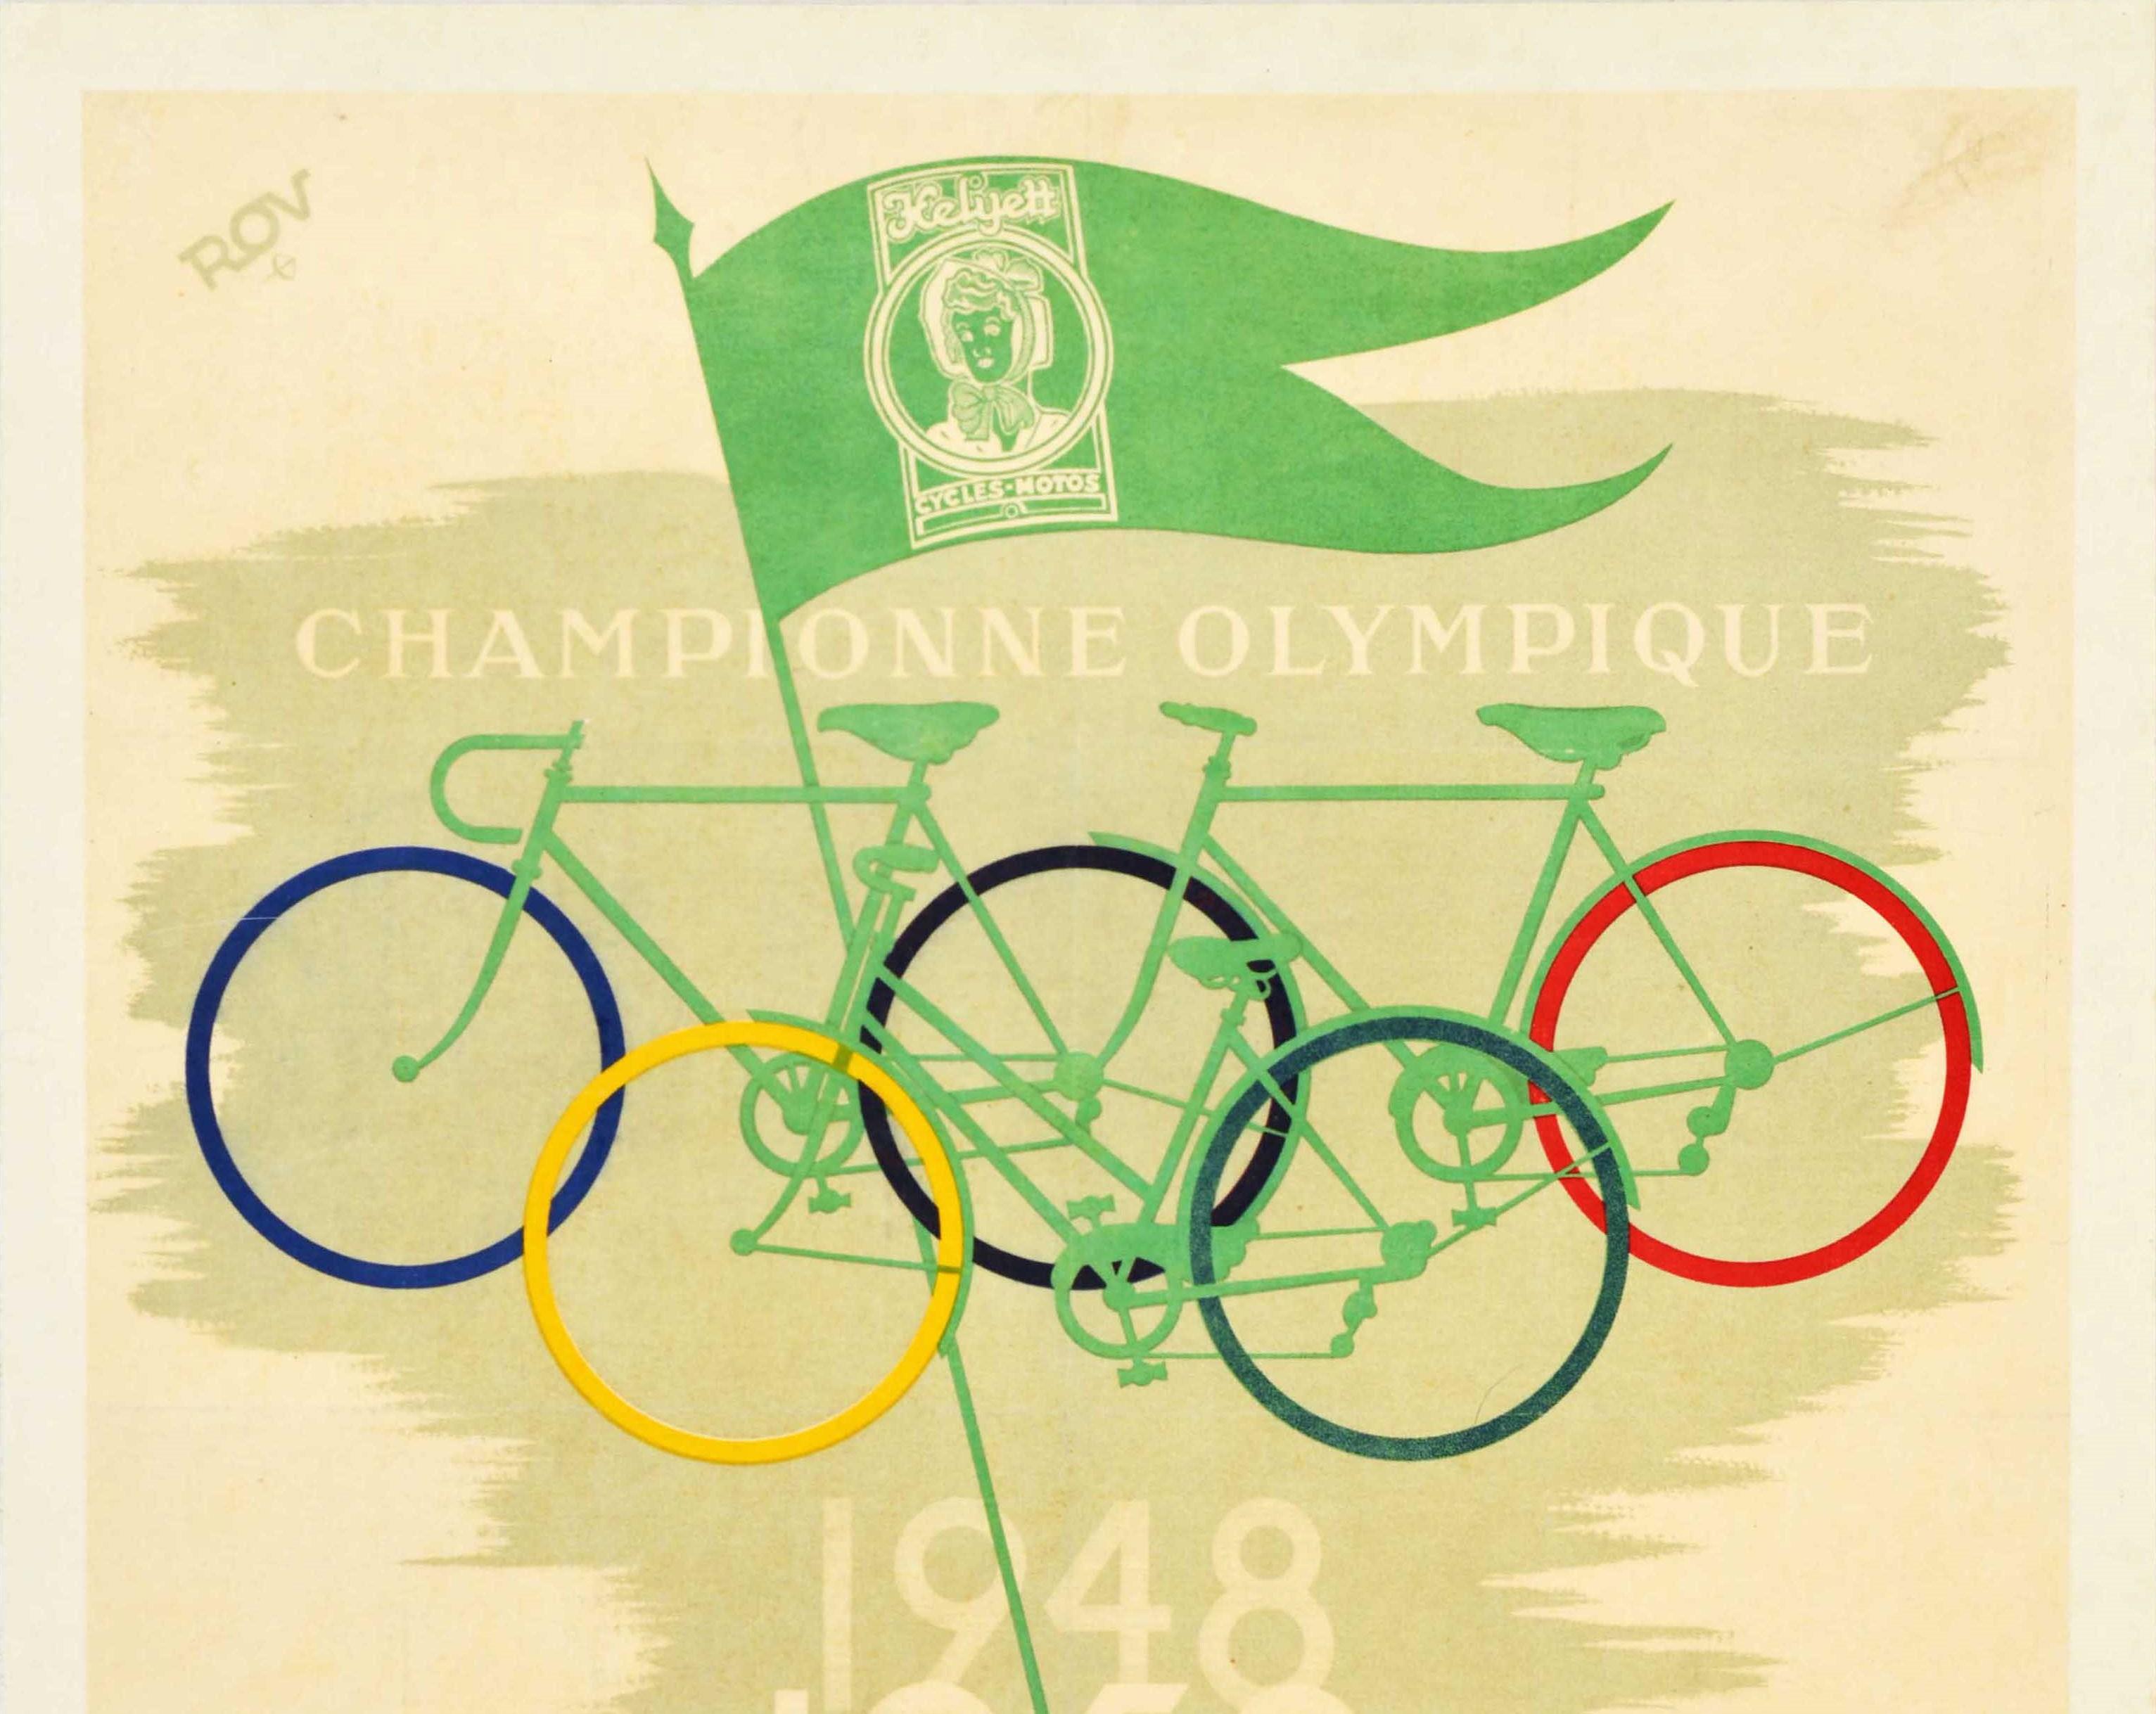 Original vintage advertising poster for Helyett bicycles featuring a clever design depicting three bikes with their wheels overlapping each other to form five colour rings of the Olympic logo with the Helyett Cycles Motos logo on a green flag